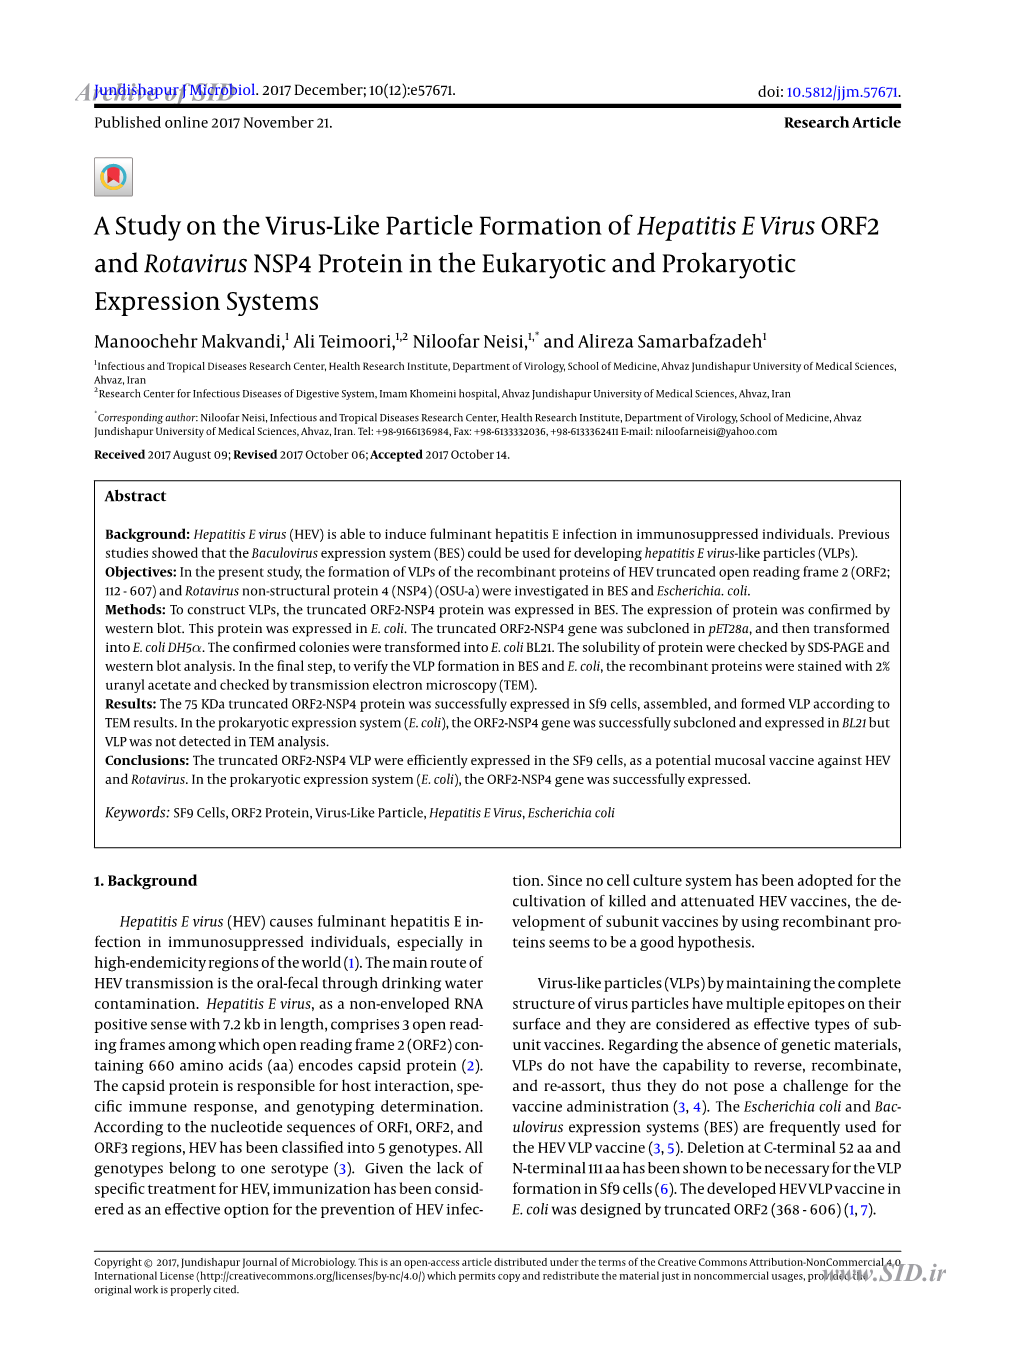 A Study on the Virus-Like Particle Formation of Hepatitis E Virus ORF2 and Rotavirus NSP4 Protein in the Eukaryotic and Prokaryotic Expression Systems